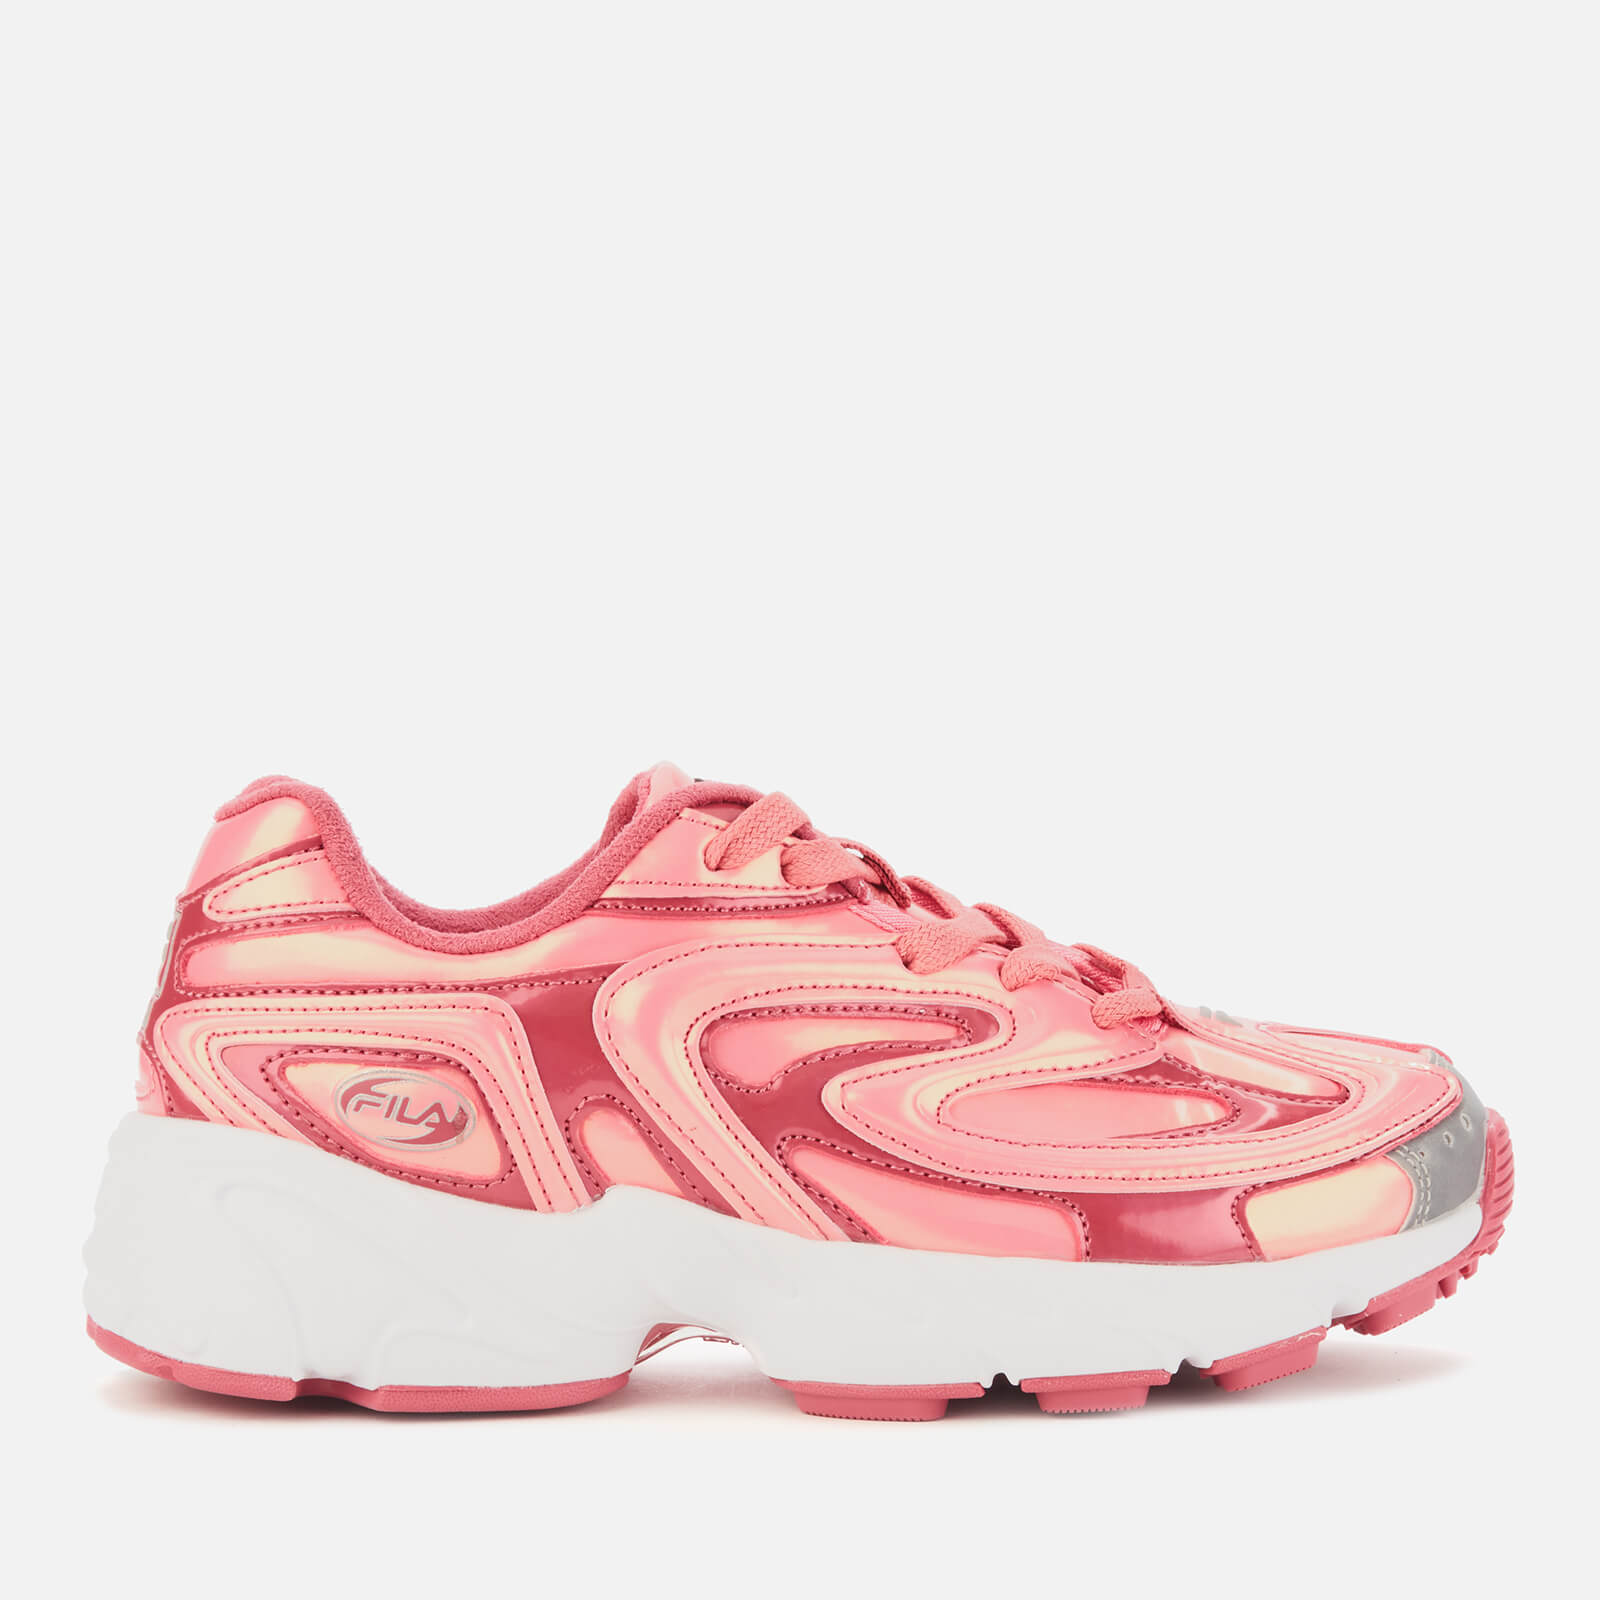 fila trainers white and pink